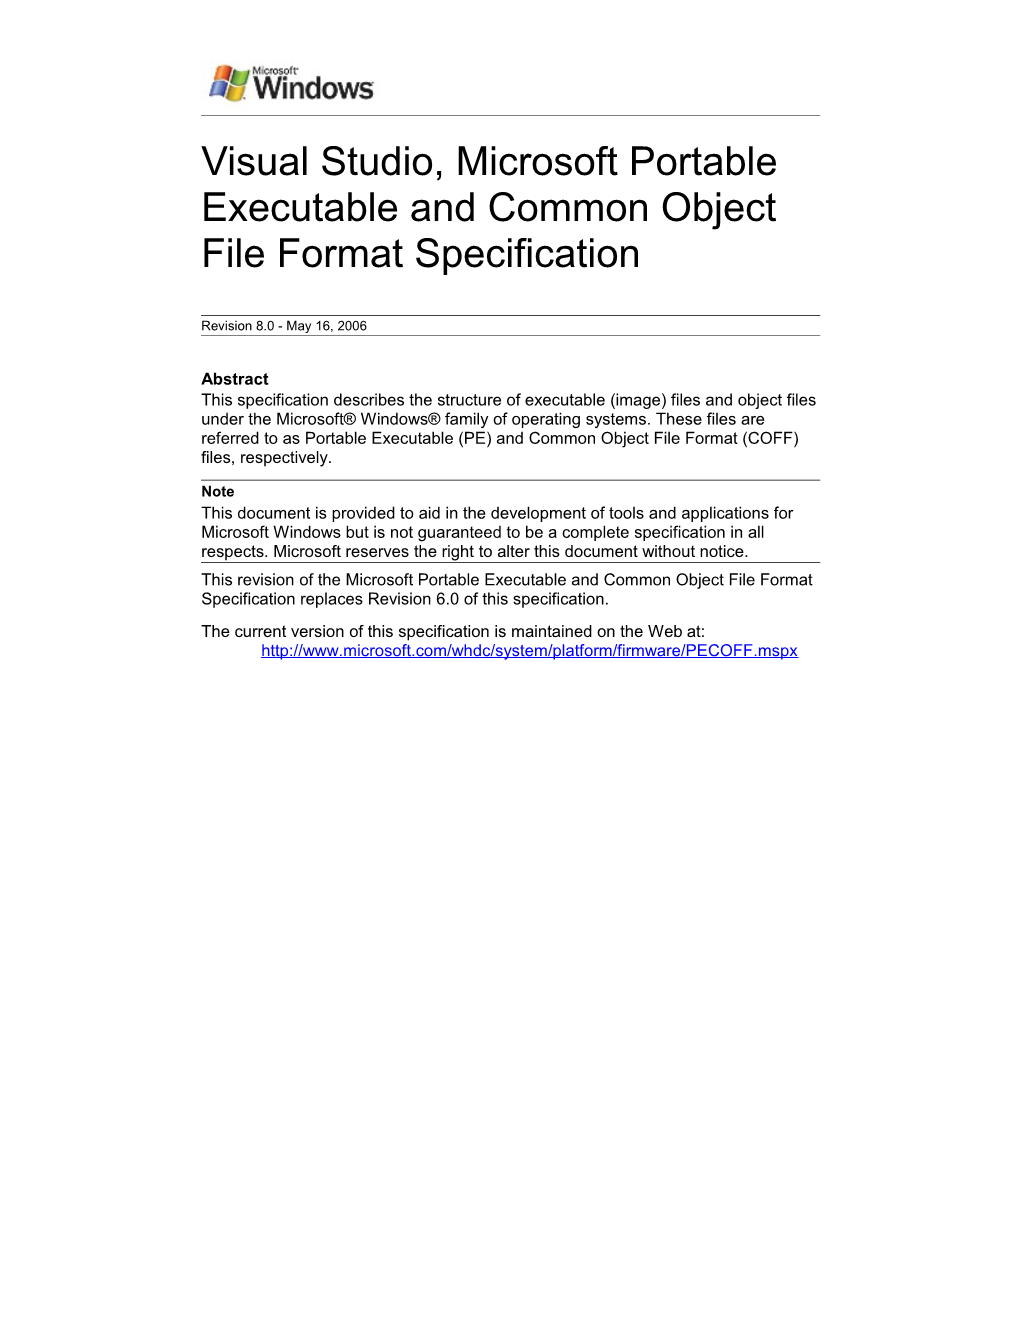 Microsoft Portable Executable and Object File Format Specification